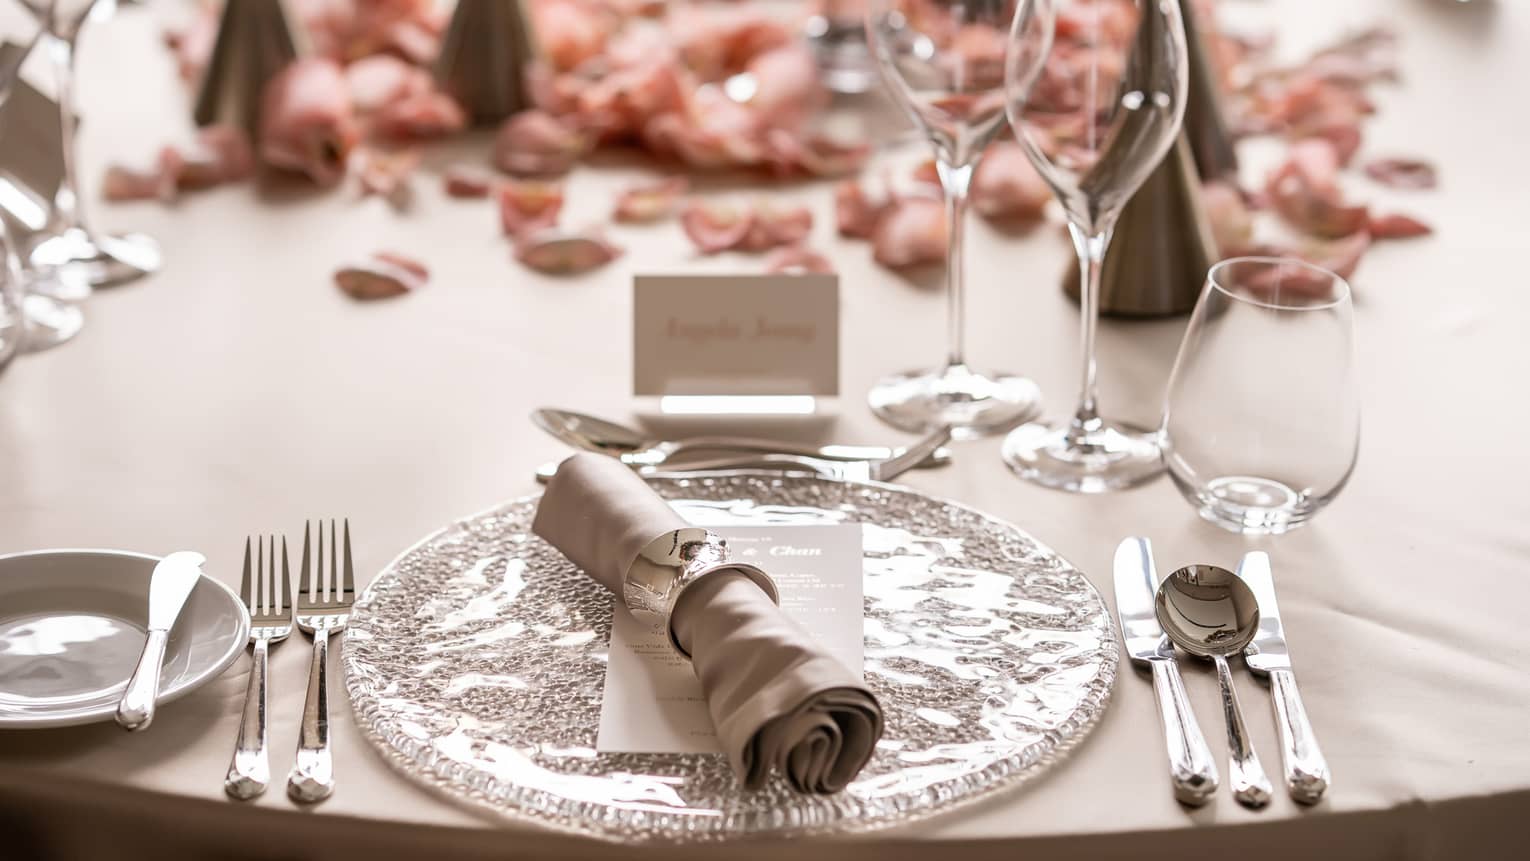 Wedding place setting with name card and pink rose petals